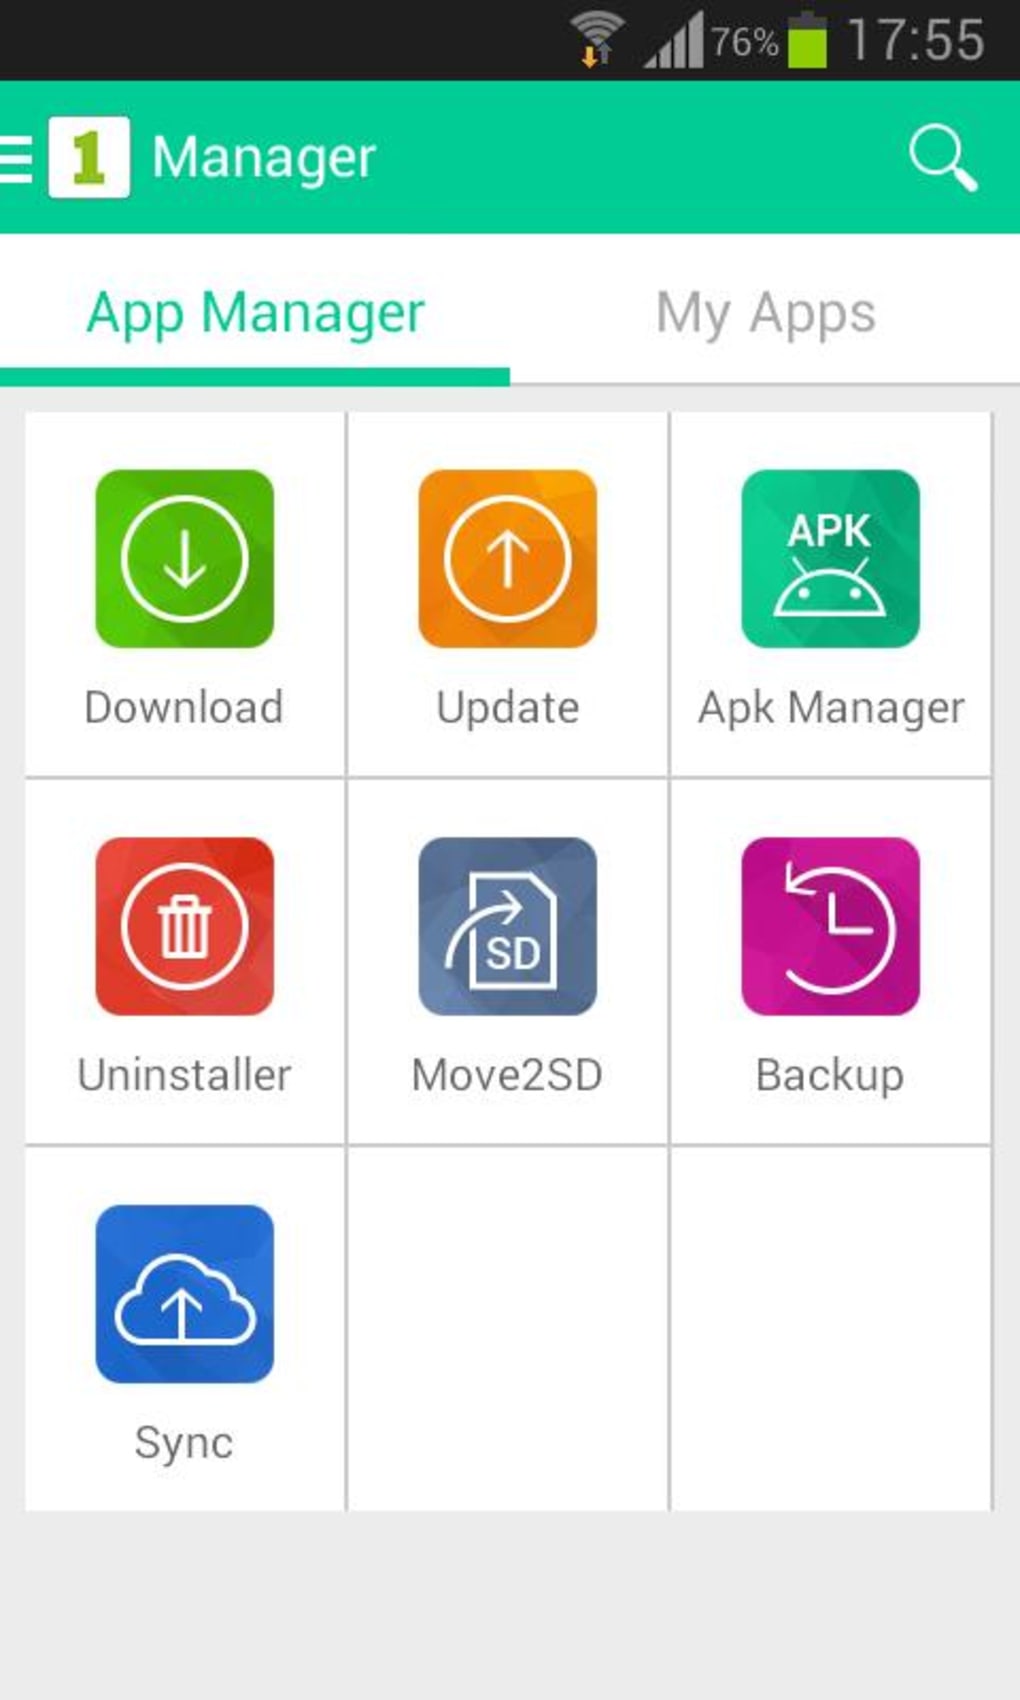 1mobile app for android free download windows 7